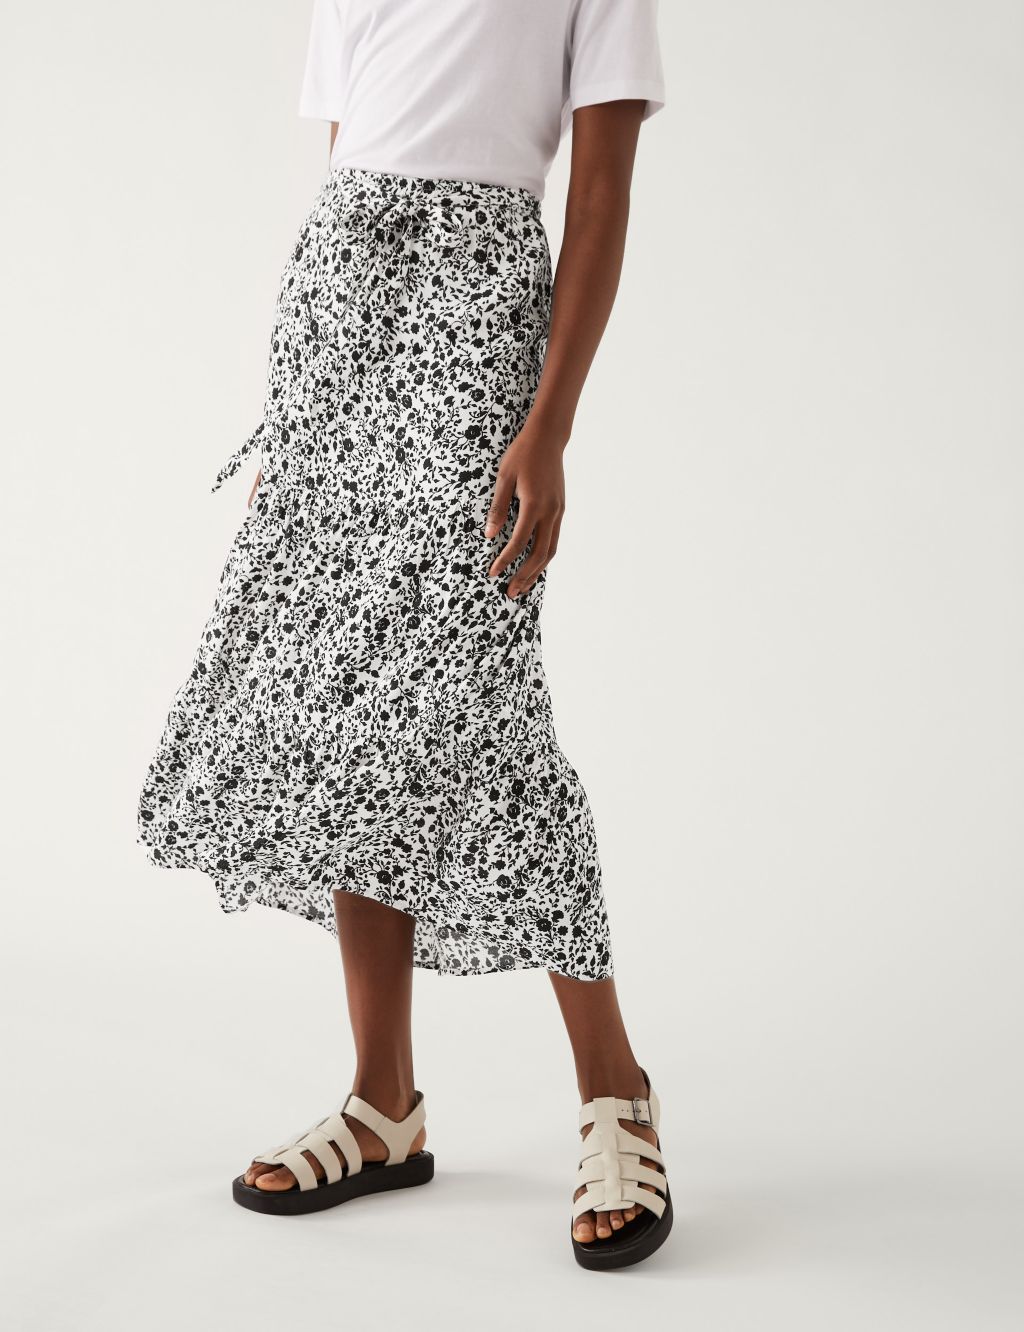 Floral Midaxi Tiered Skirt image 3